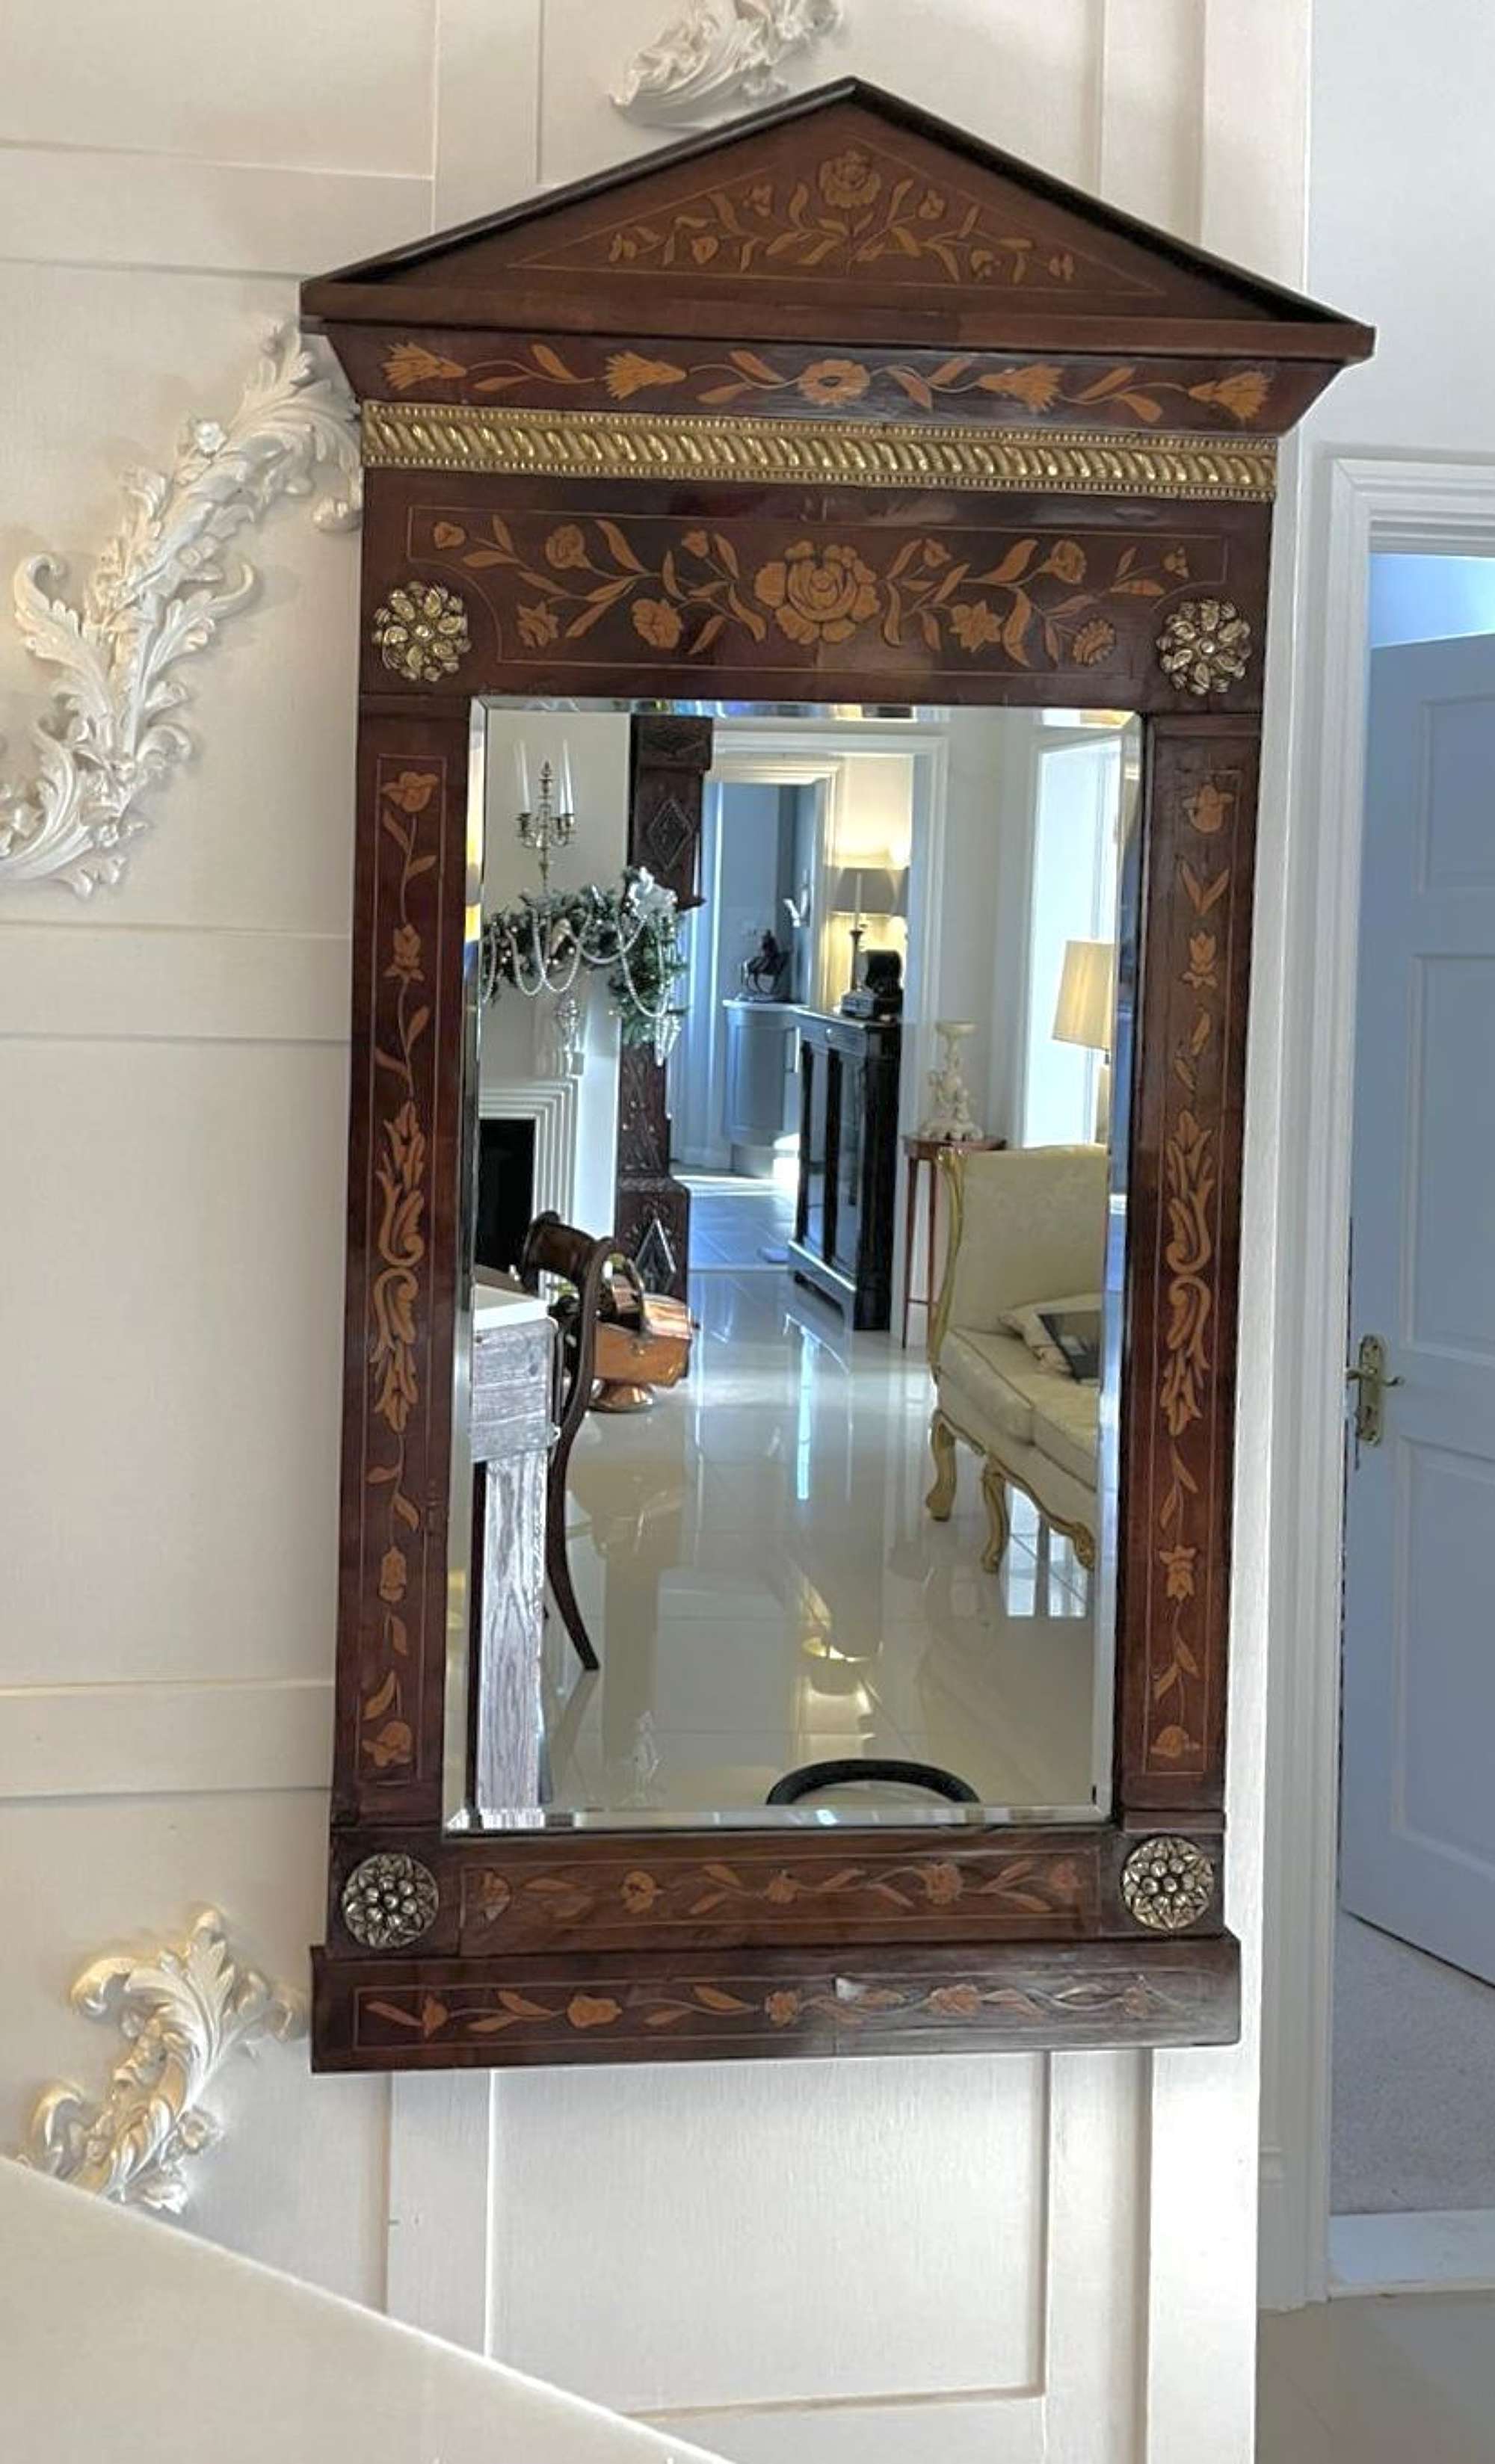 Outstanding Quality Antique George Iii Dutch Marquetry Mahogany Inlaid Wall Mirror